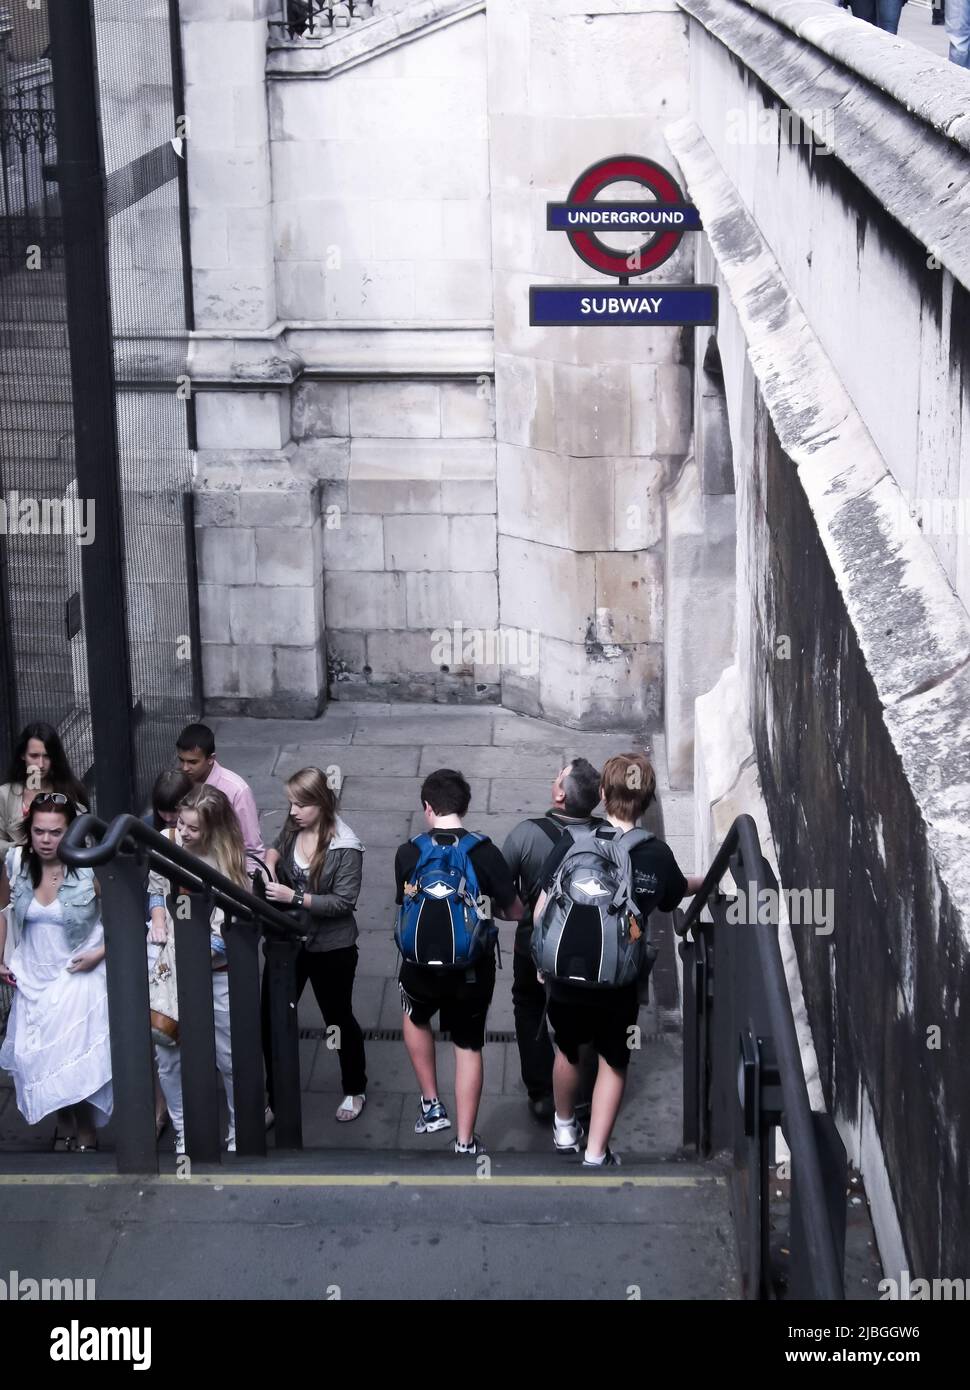 London, United Kingdom - July 10, 2011 : Tourists and local people at the entrance of London Underground (Tube). Stock Photo